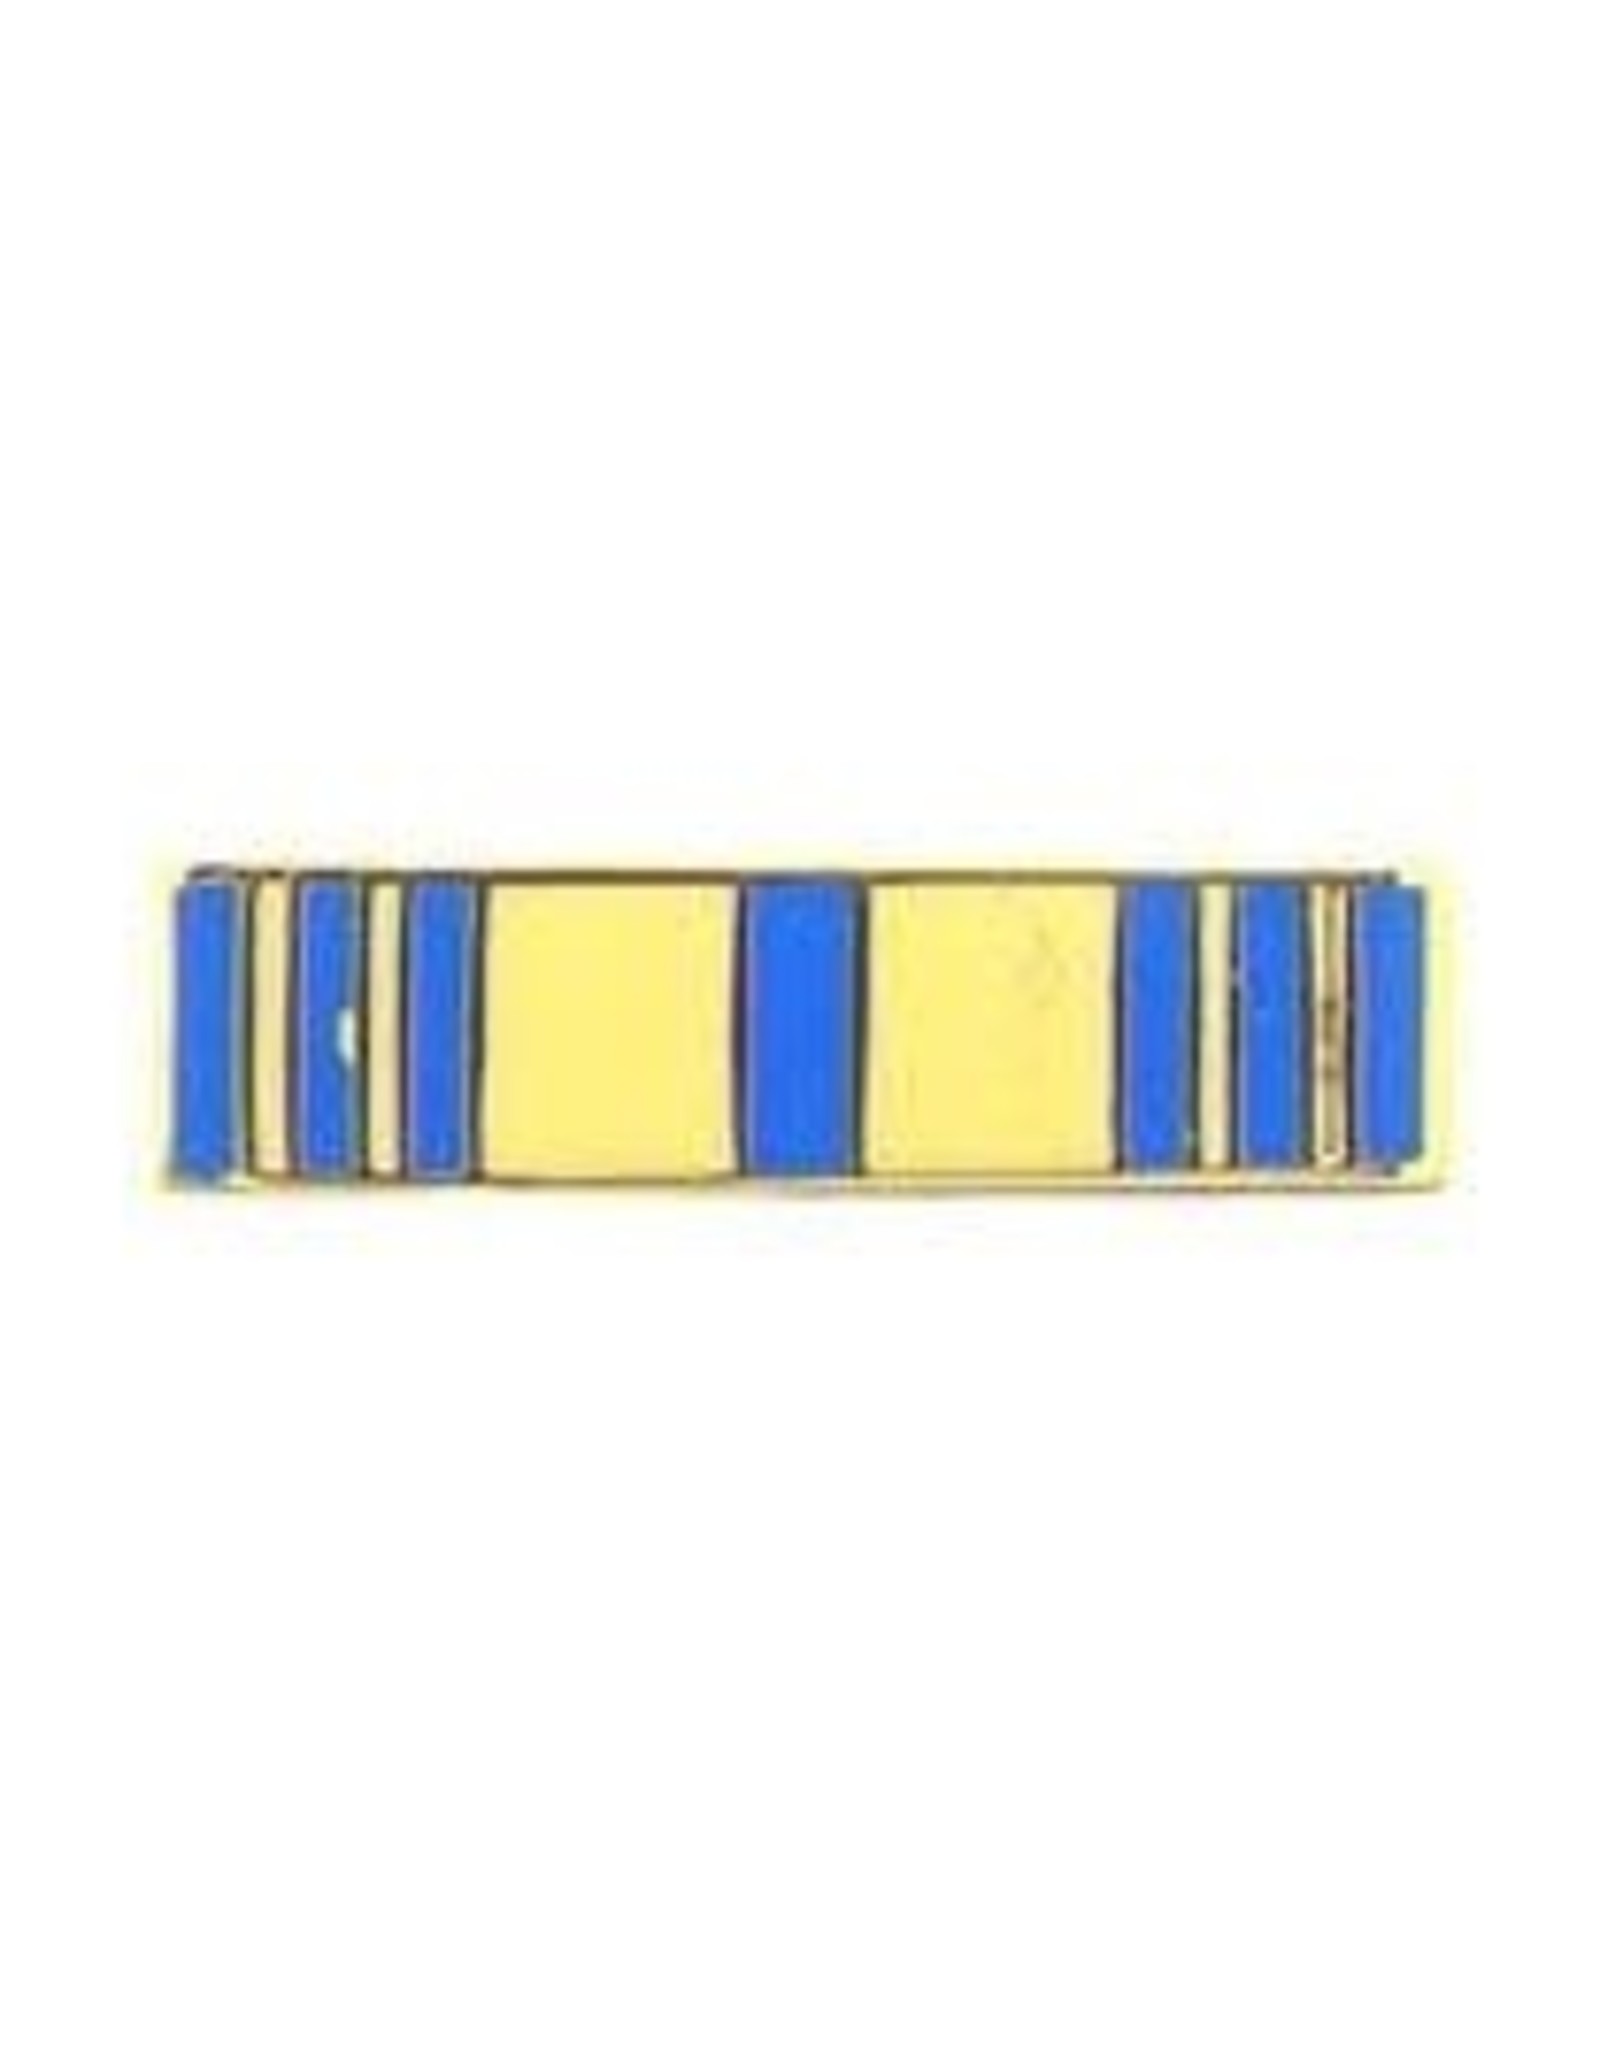 Pin - Ribbon Armed Forces Reserves